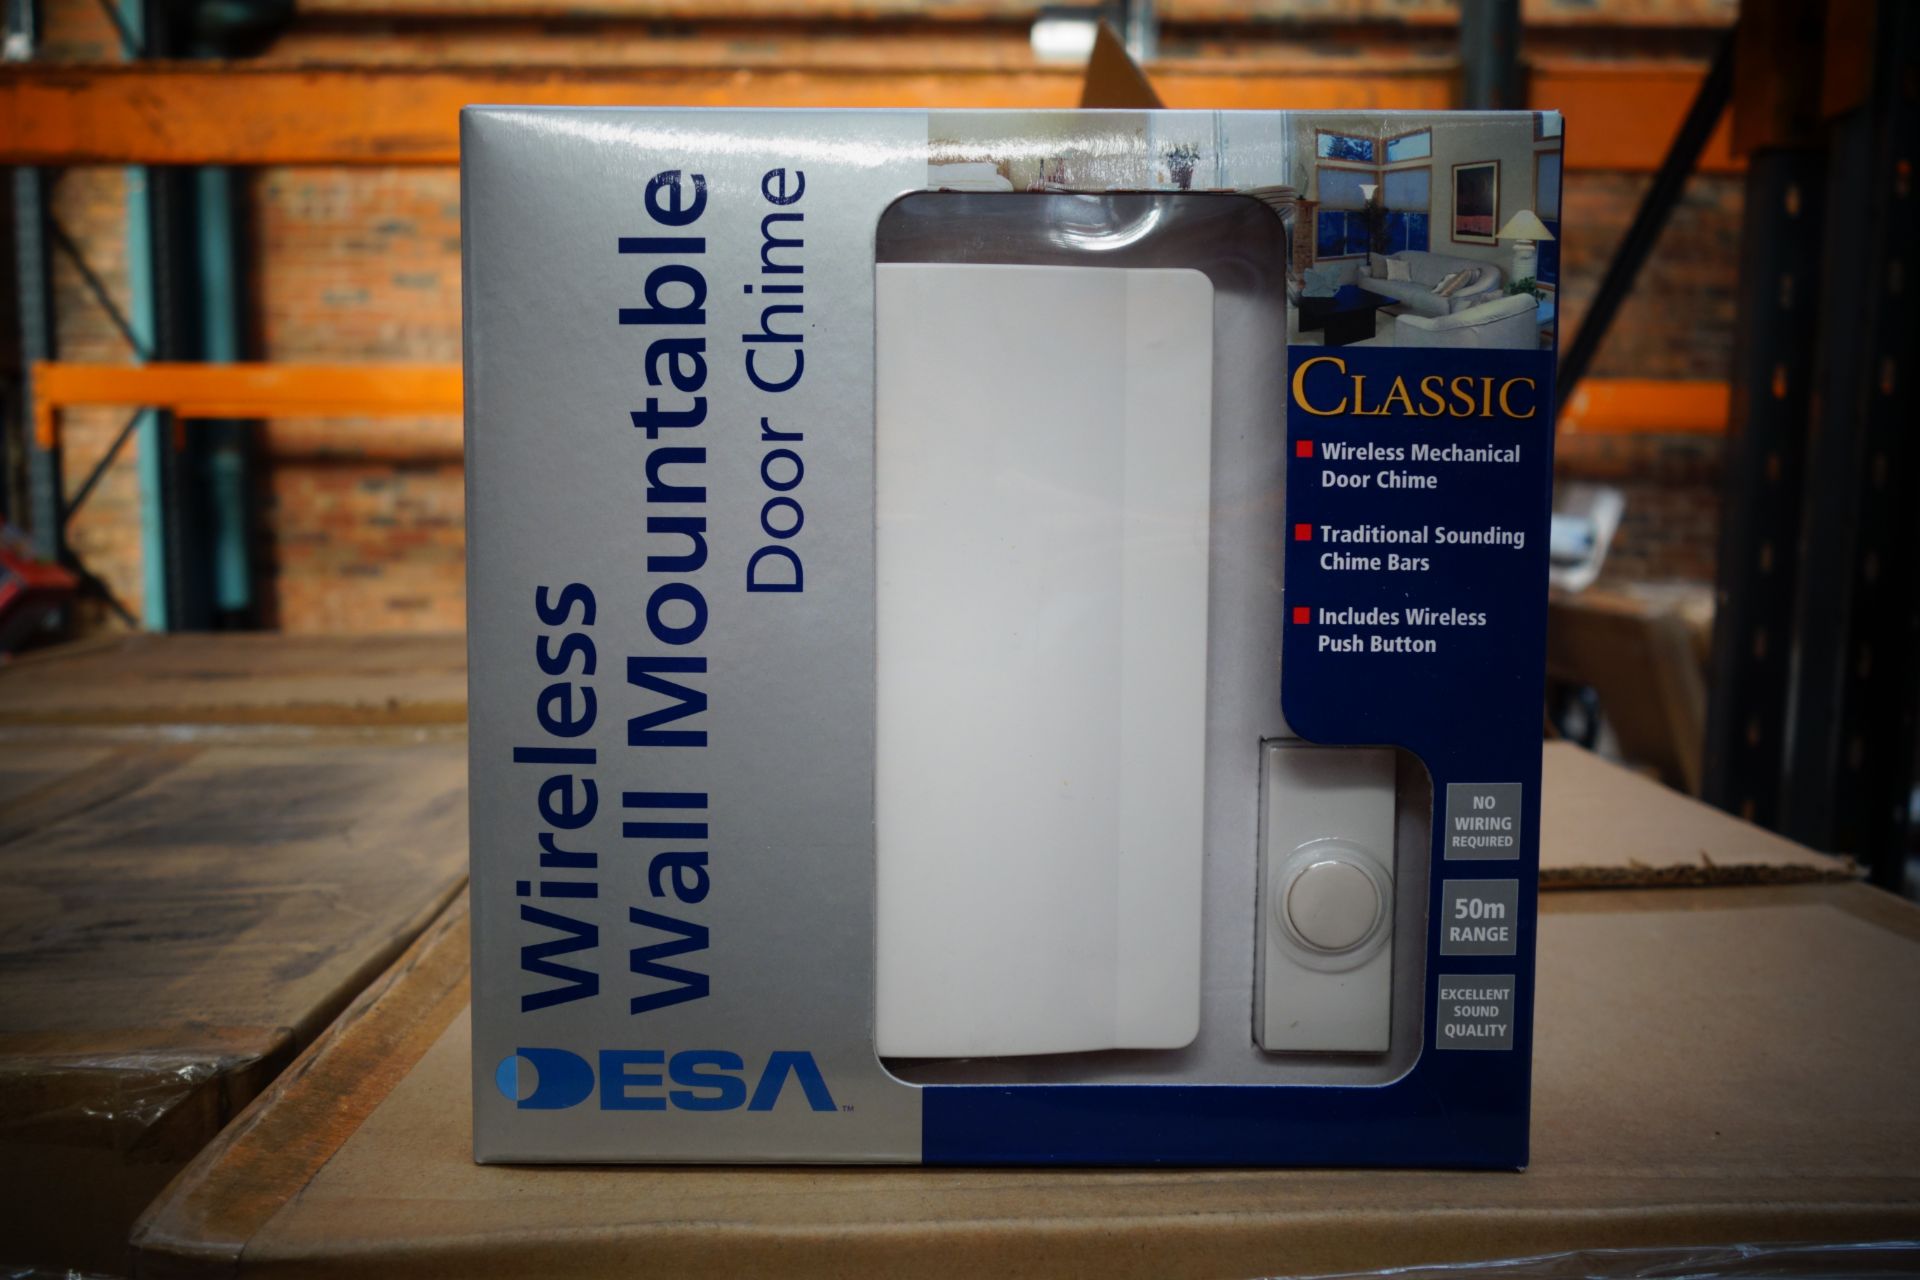 24 x New Desa Wireless Wall Mountable 50M Range Door Chimes. RRP £29.99 each, giving this lot a